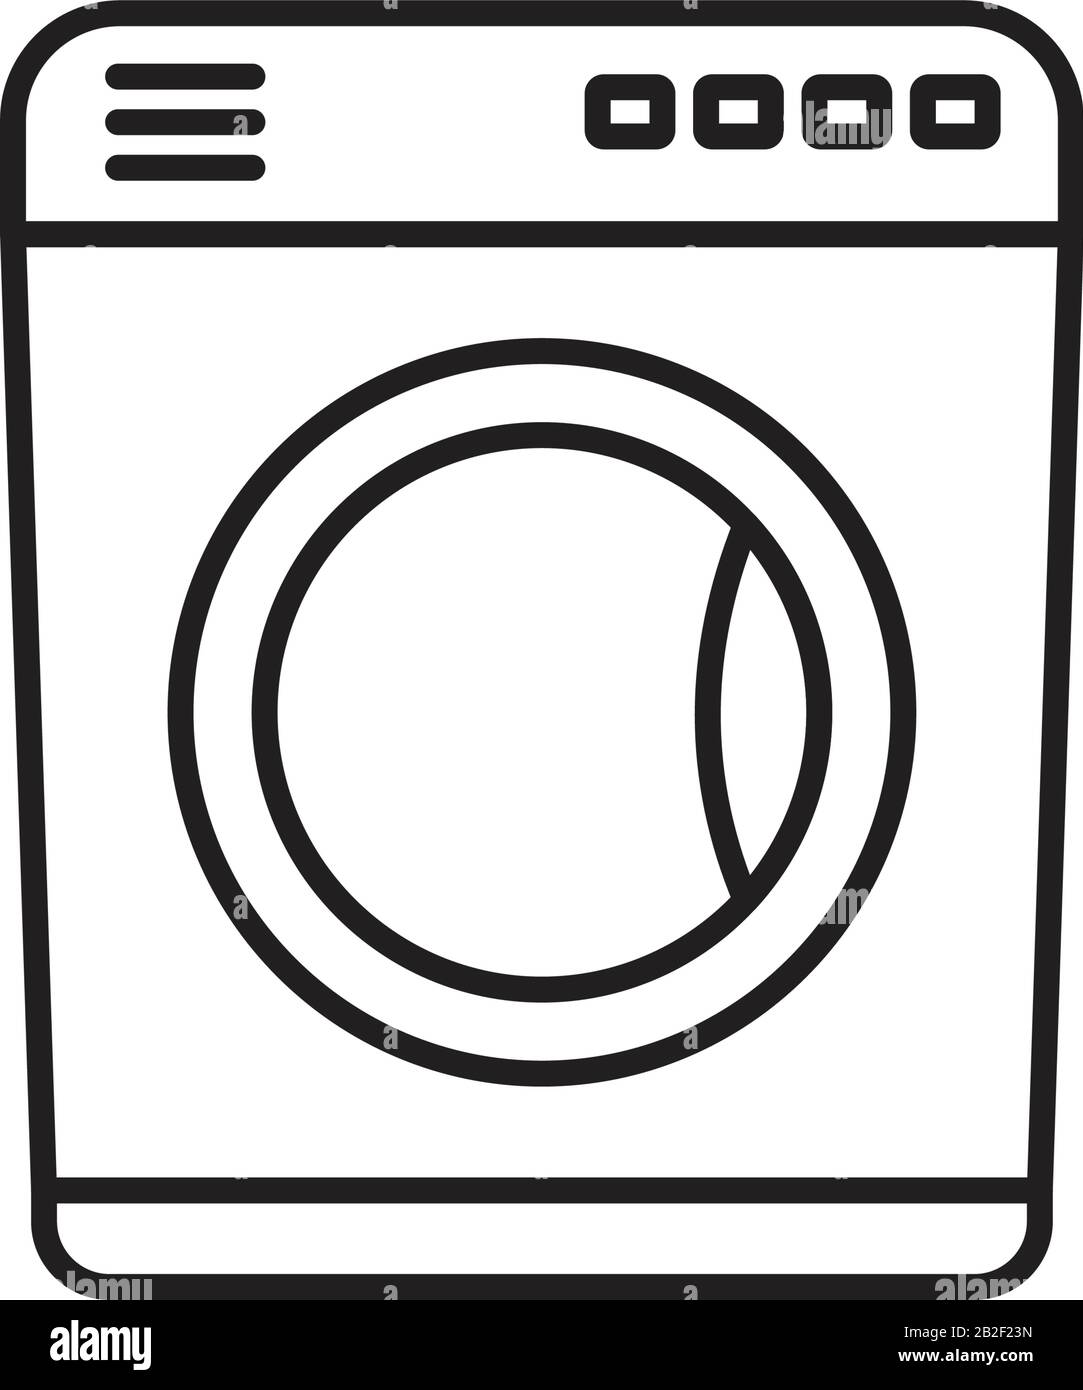 Washing machine icon template black color editable. Washing machine icon symbol Flat vector illustration for graphic and web design. Stock Vector